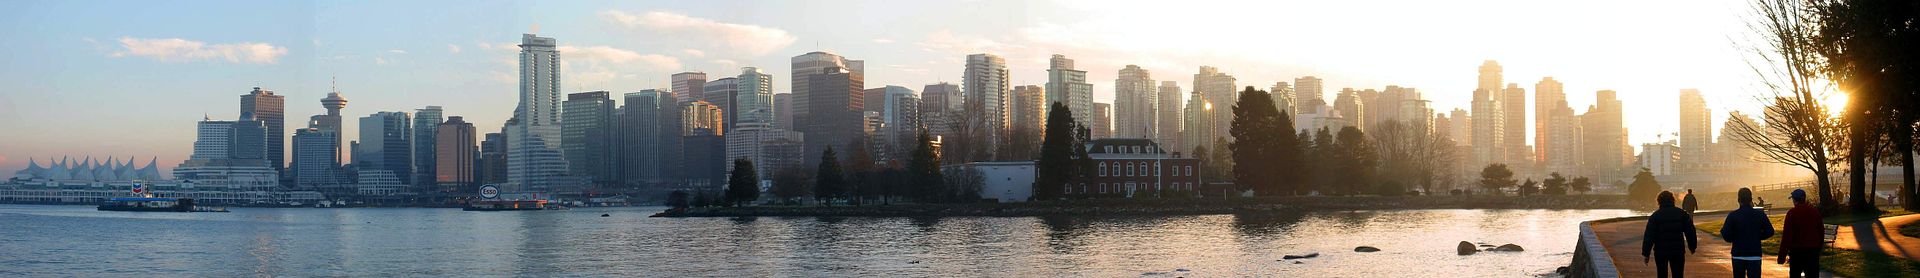 CoalHarbourfromStanleyParkPano-Day.jpg